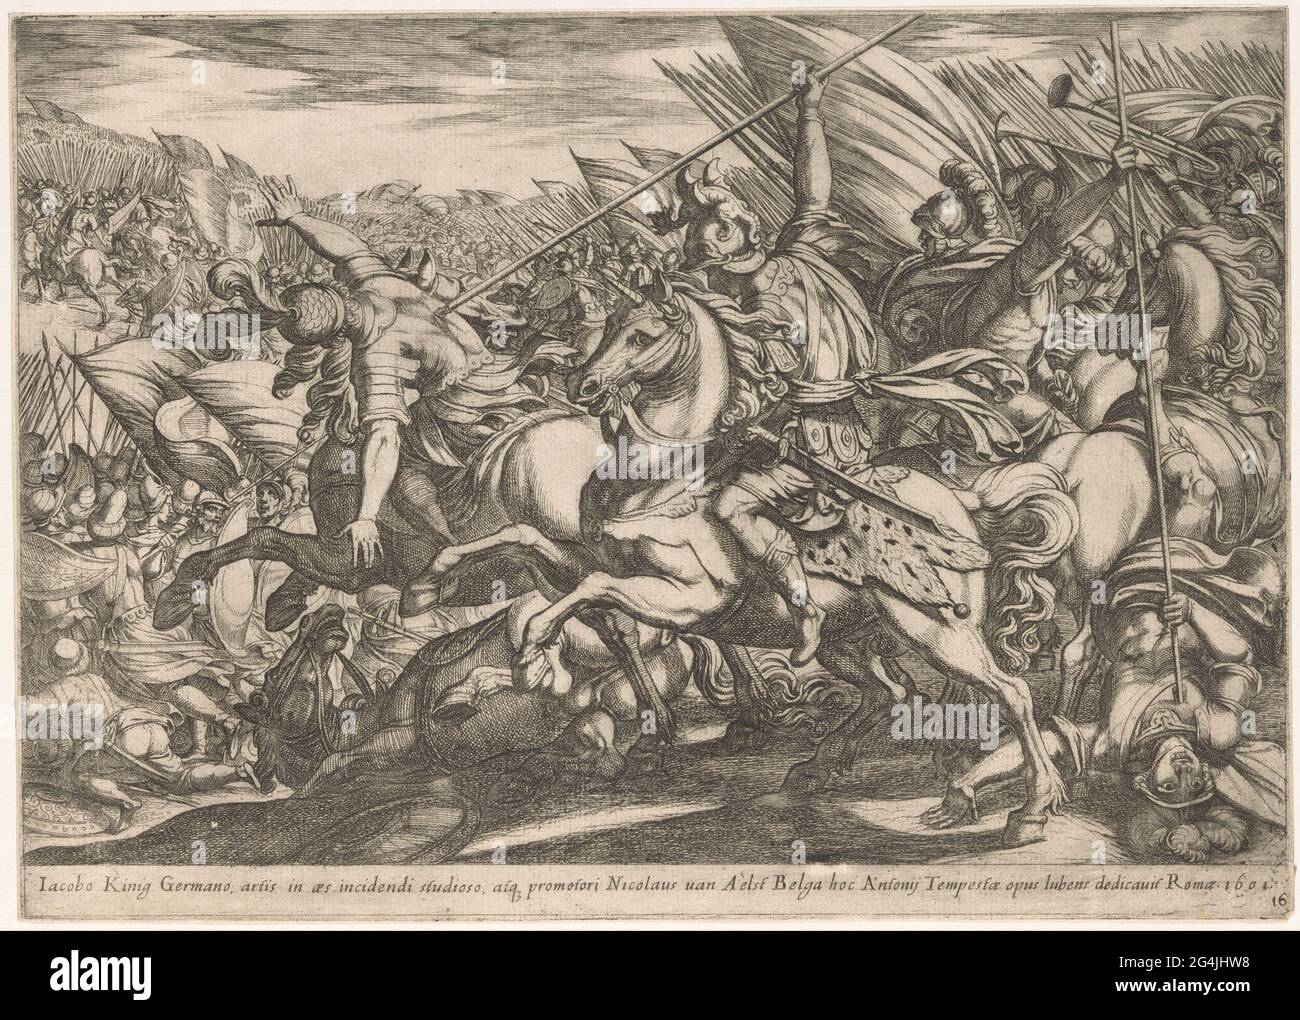 Attack of the cavalry with two men pierced by spears; Combat scenes (series 3). A fierce battle between soldiers on horseback with spears. Two soldiers are pierced in the foreground. Stock Photo